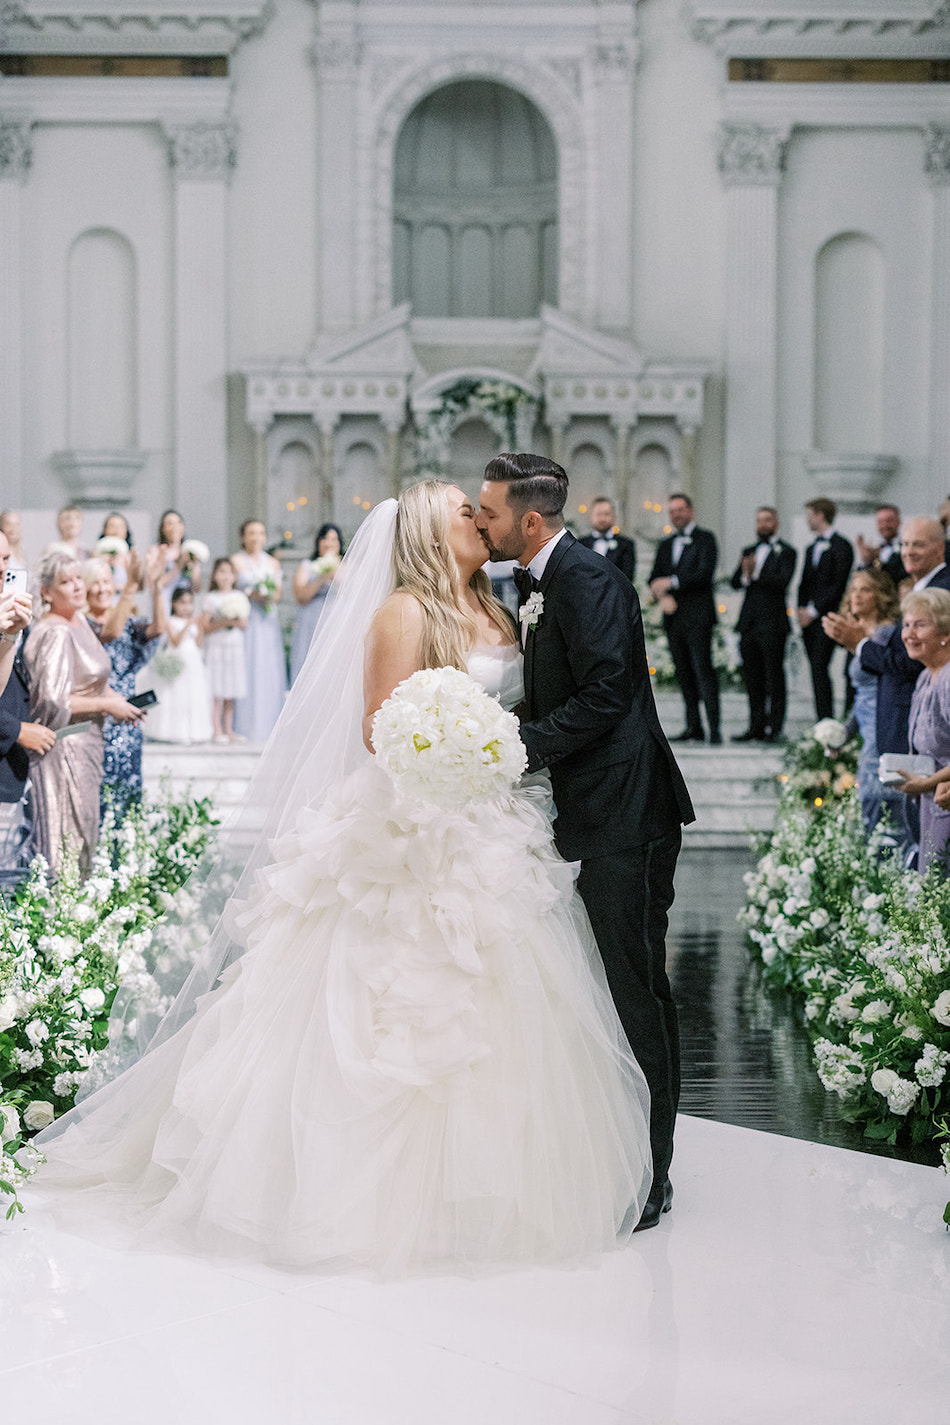 first kiss, just married, white ceremony florals, floral design, florist, wedding florist, wedding flowers, orange county weddings, orange county wedding florist, orange county florist, orange county floral design, flowers by cina